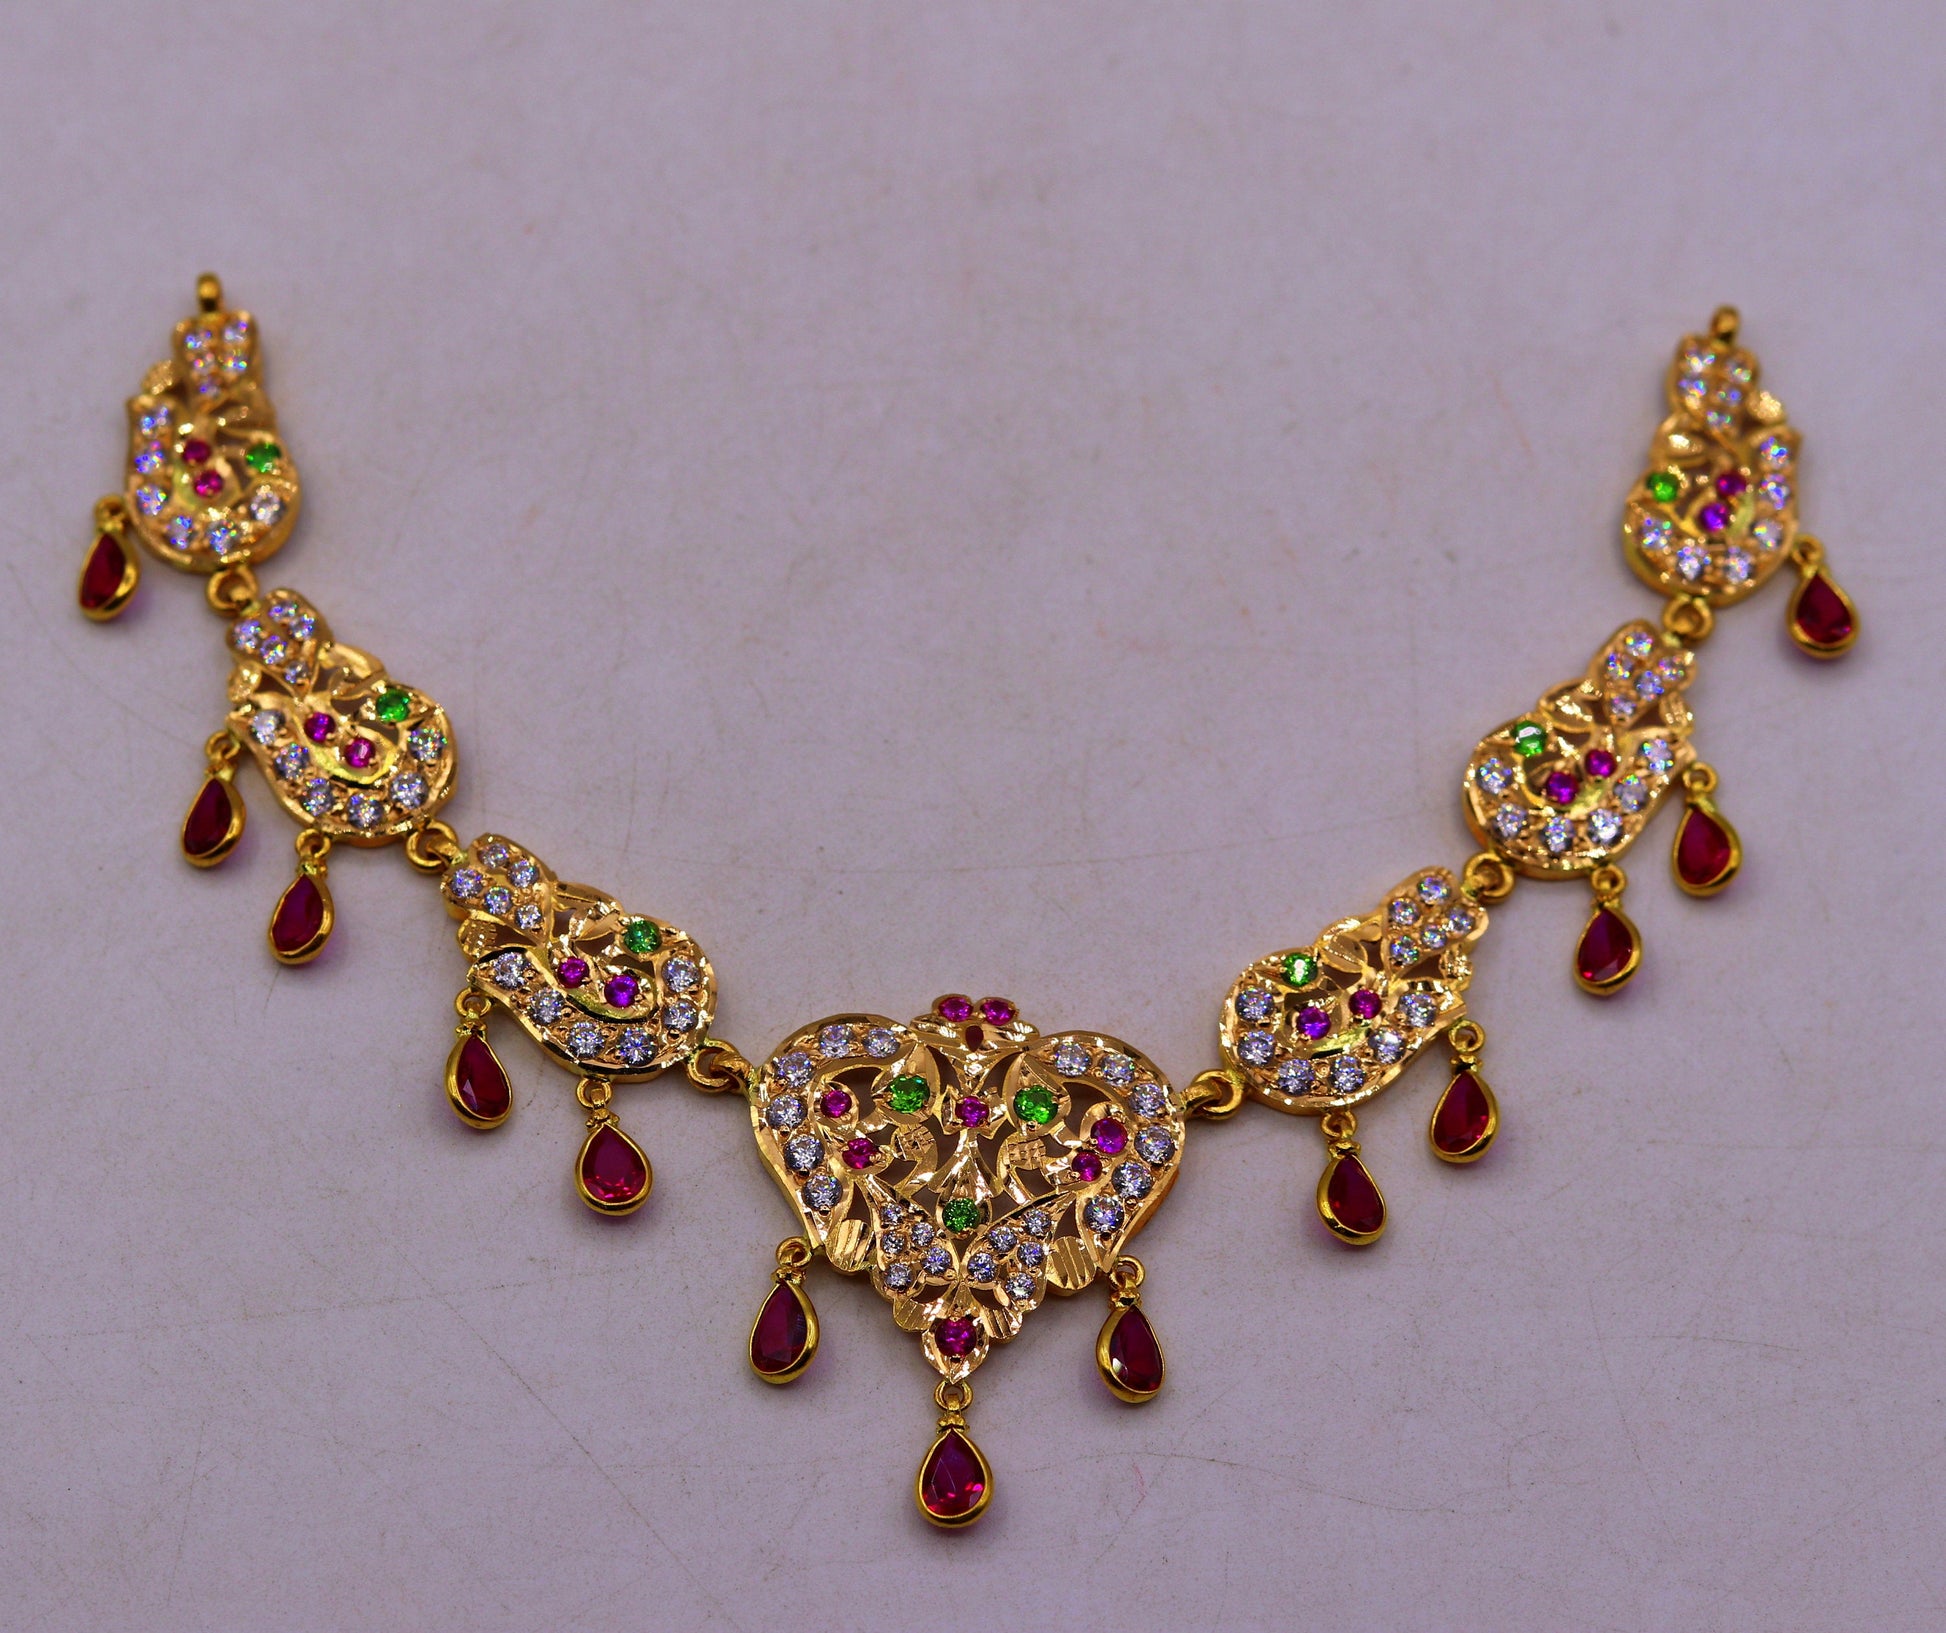 22 karat yellow gold Vintage traditional stylish Necklace indian gold jewellery from rajasthan and punjab india - TRIBAL ORNAMENTS